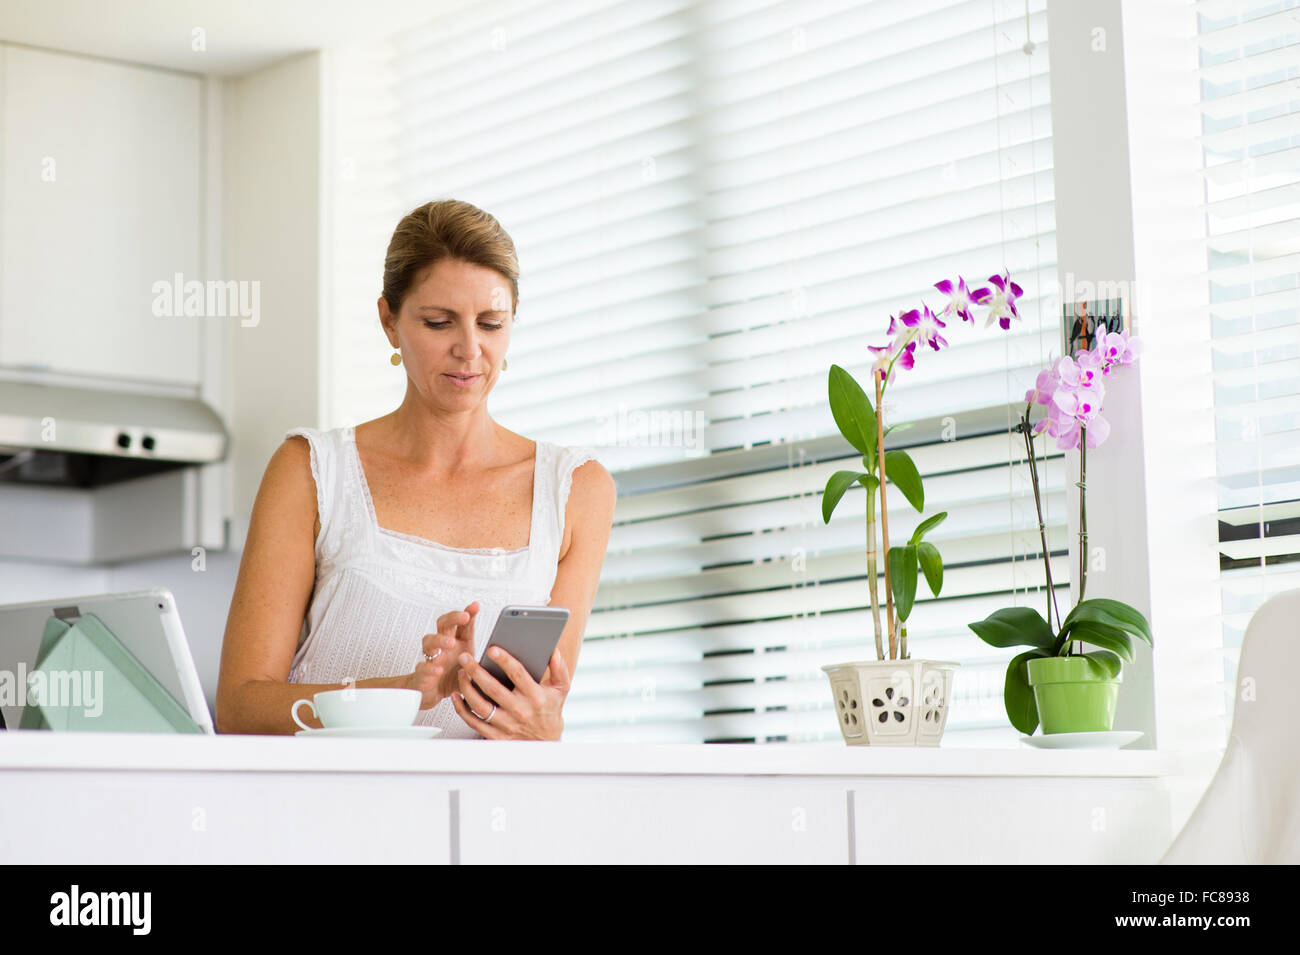 Caucasian woman using cell phone in kitchen Stock Photo